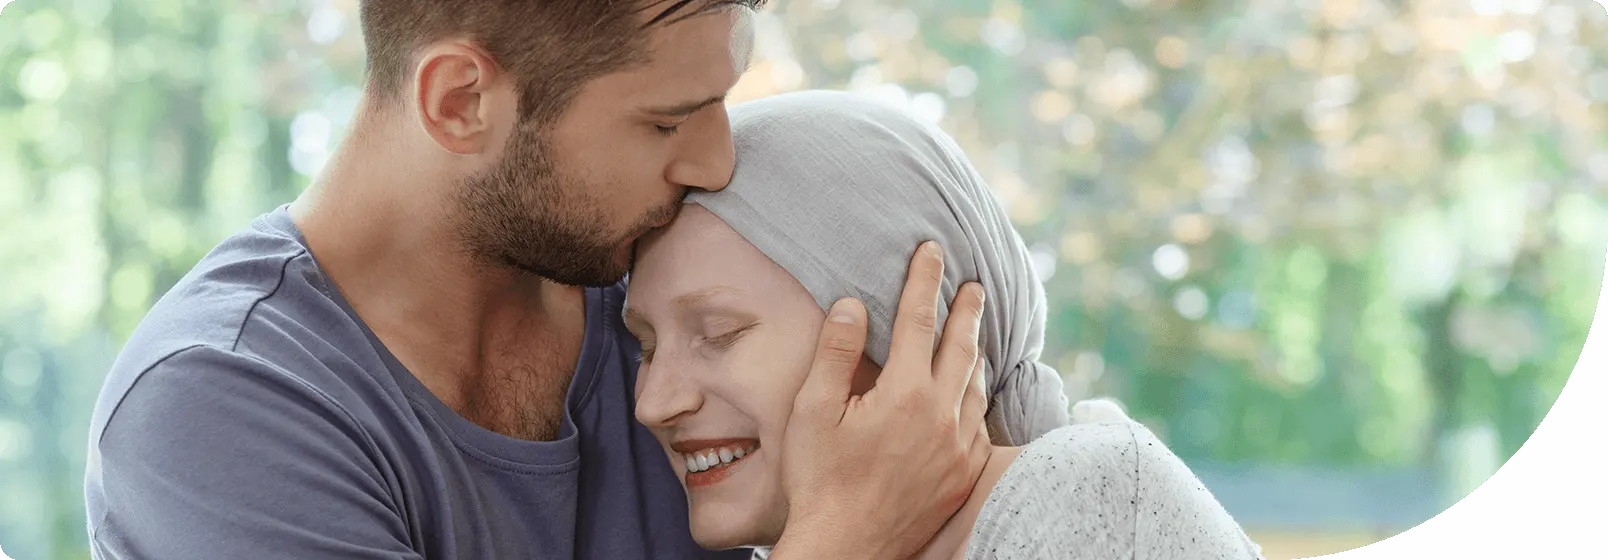 man holding woman wearing a scarf over her head due to cancer treatment